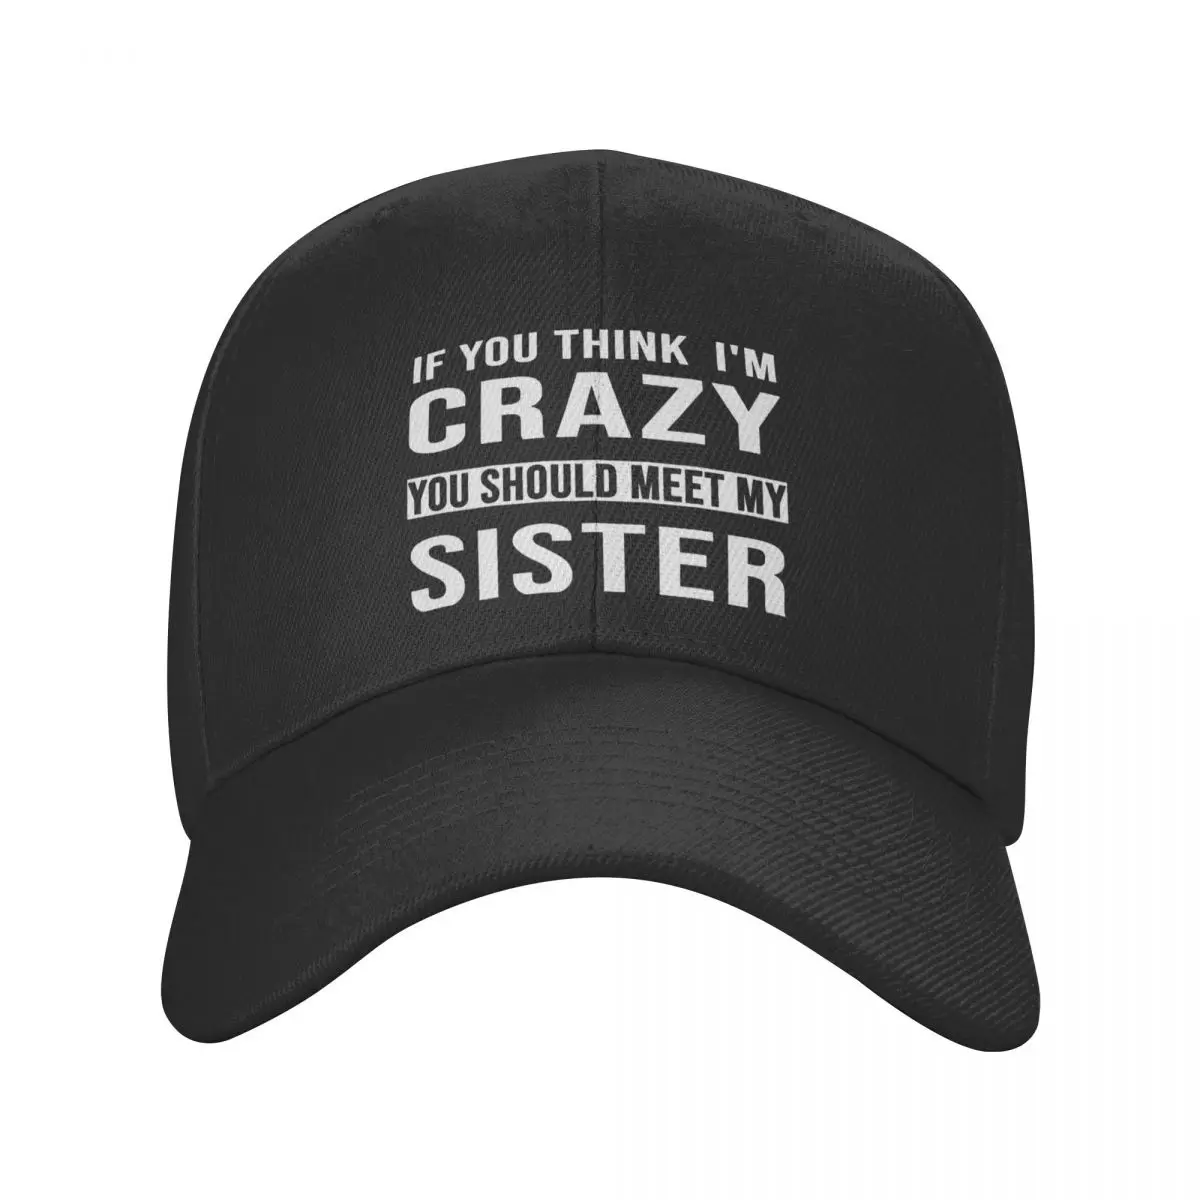 

If You Think I'm Crazy You Should Meet My Sister Casquette, Polyester Cap Retro Cute Wind Moisture Wicking Travel Nice Gift